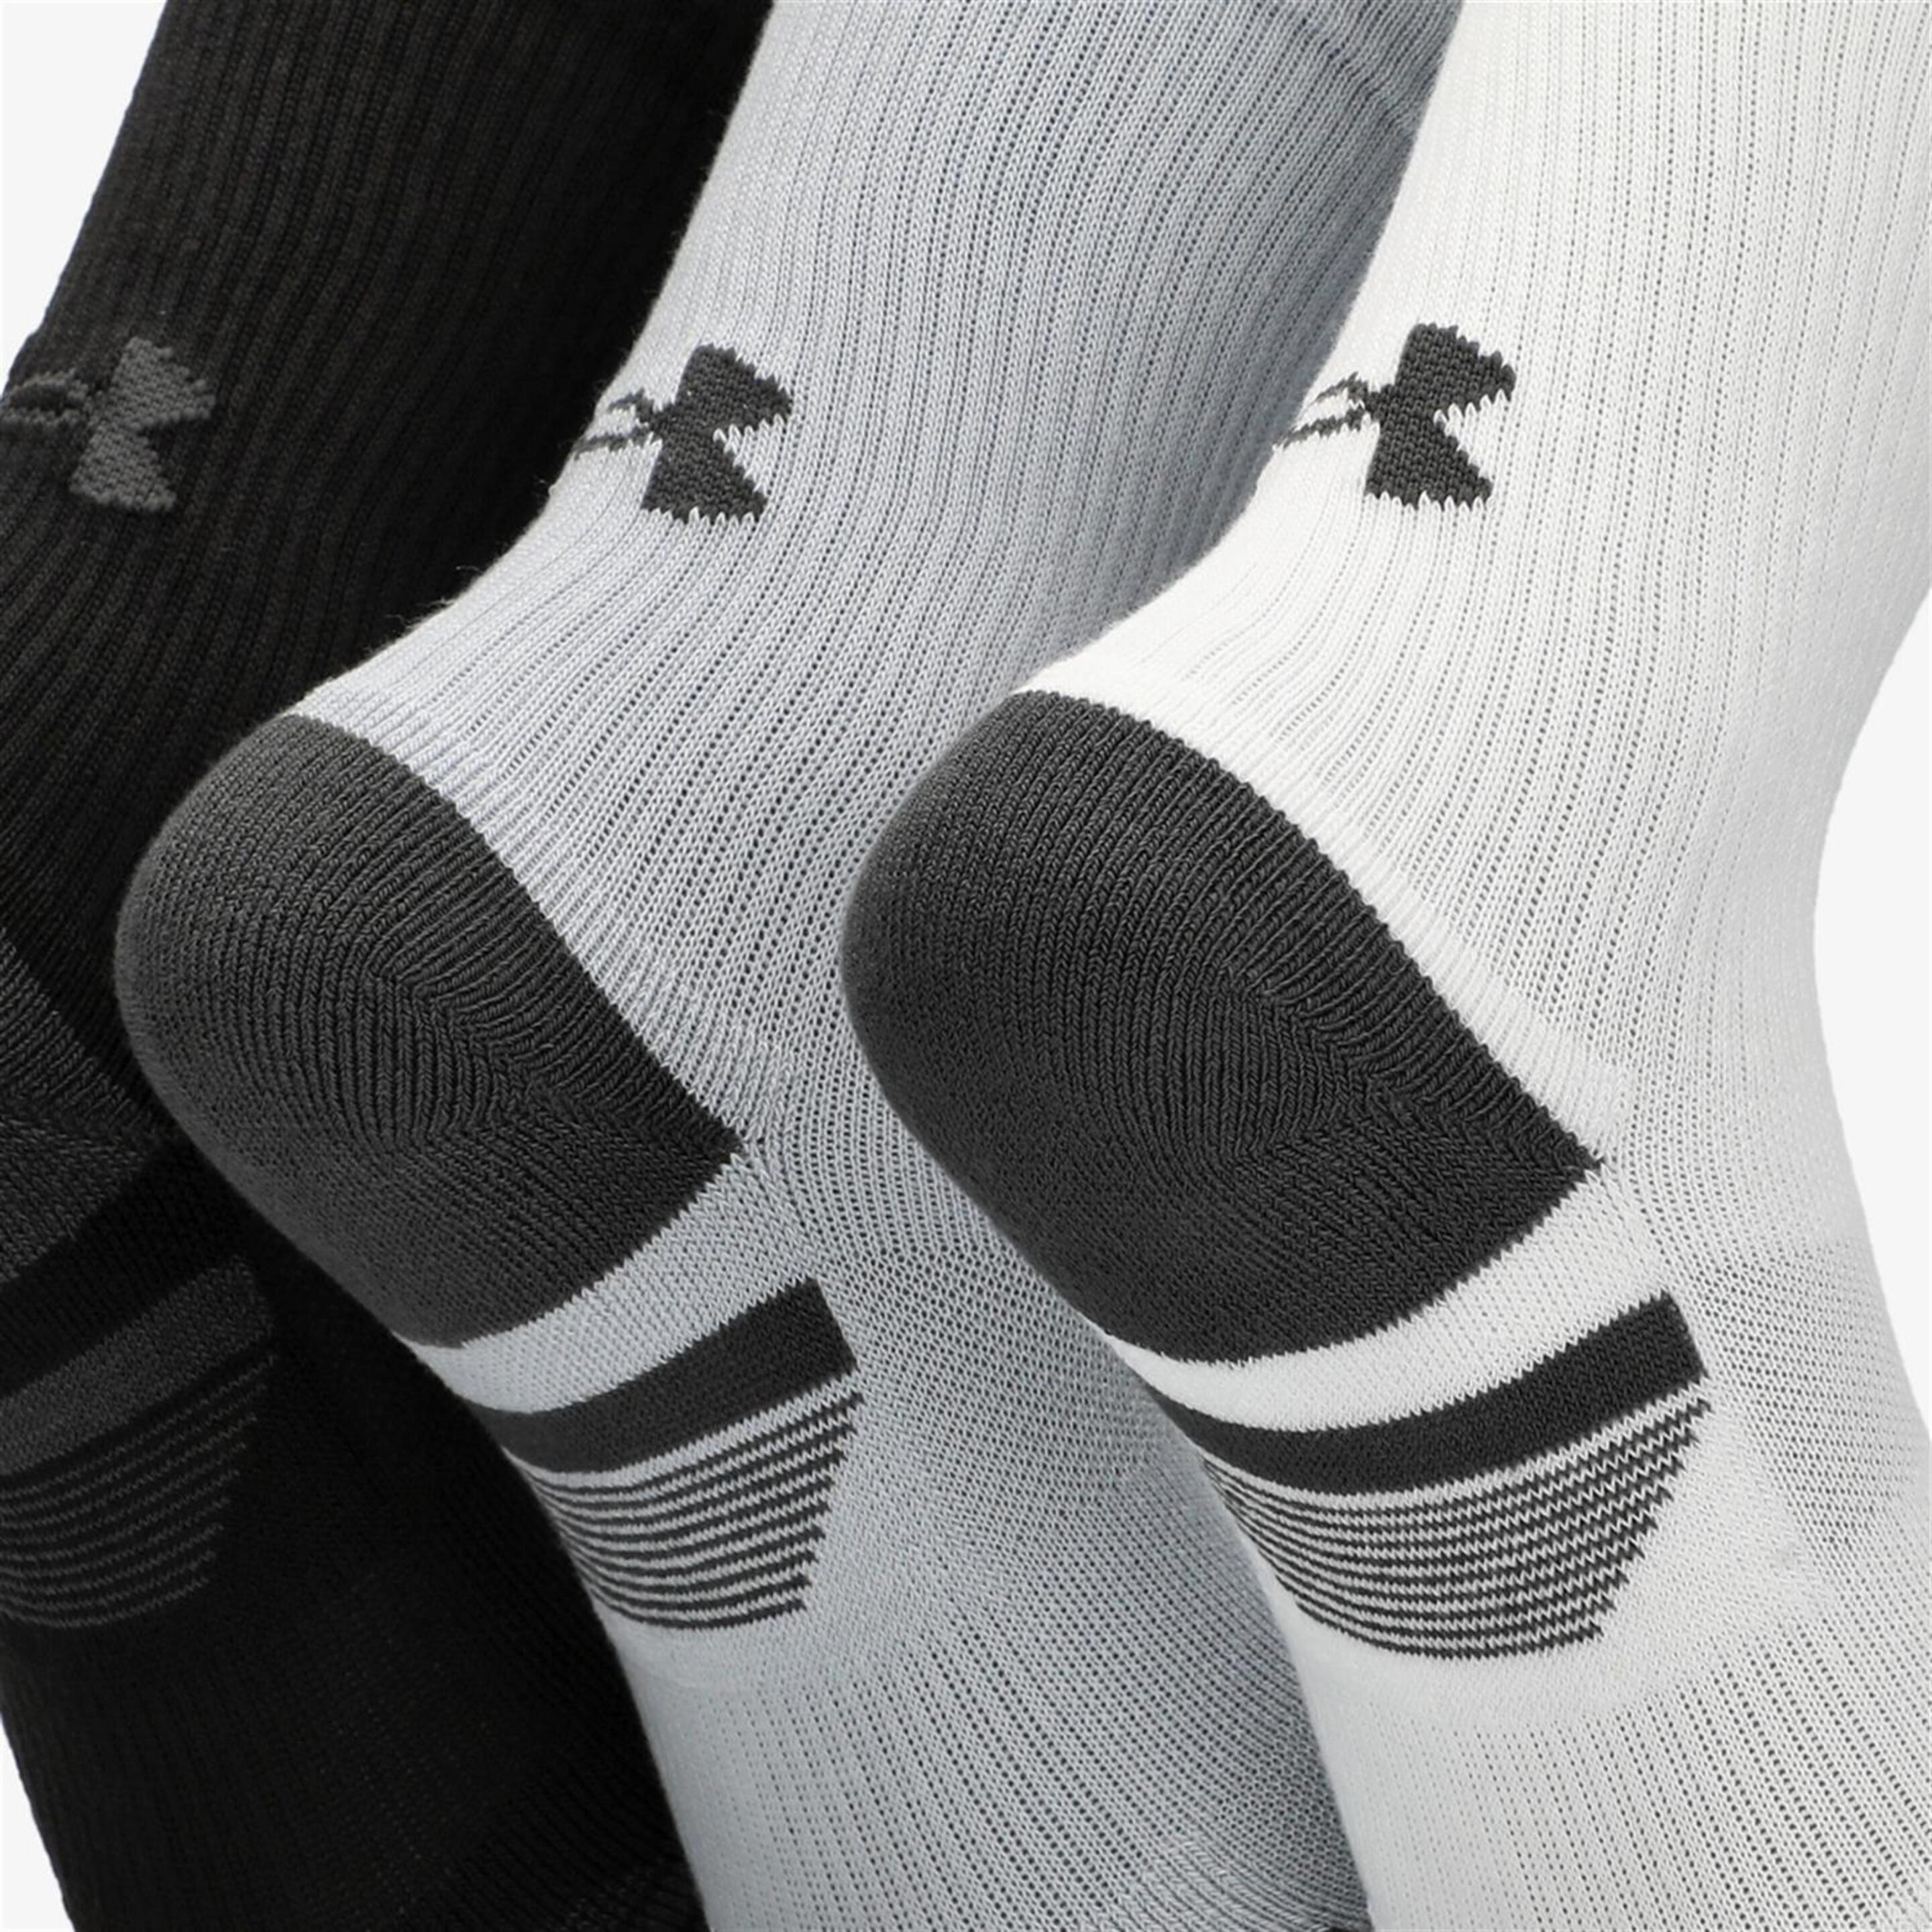 Under Armour Performance Tech - Negro - Calcetines